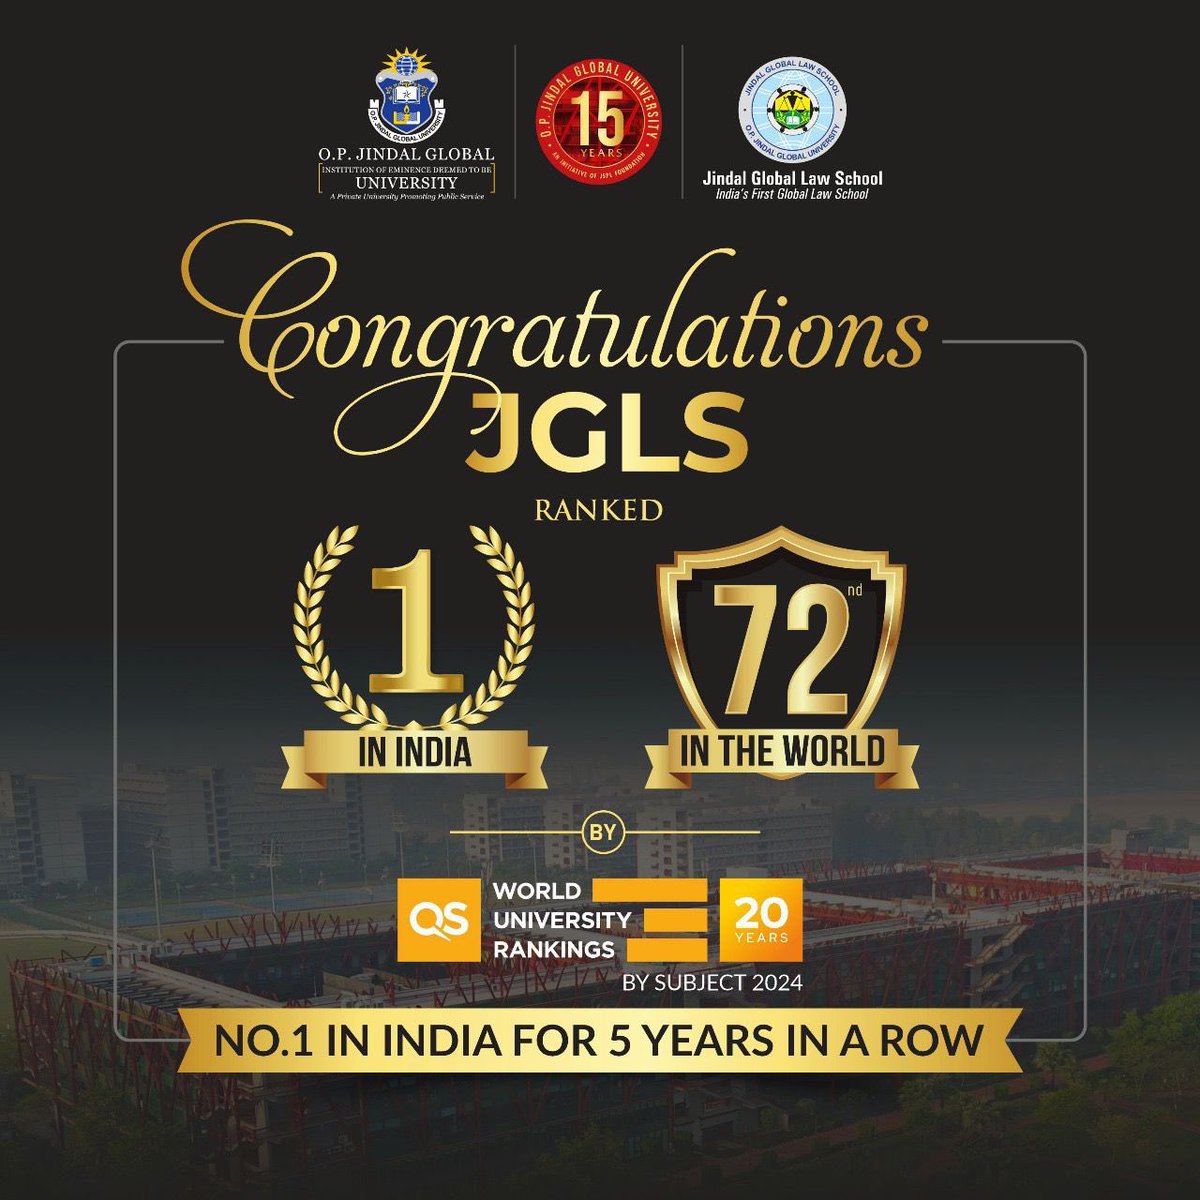 many many congratulations for this it's amazing

#JindalGlobalLawSchoolNo1